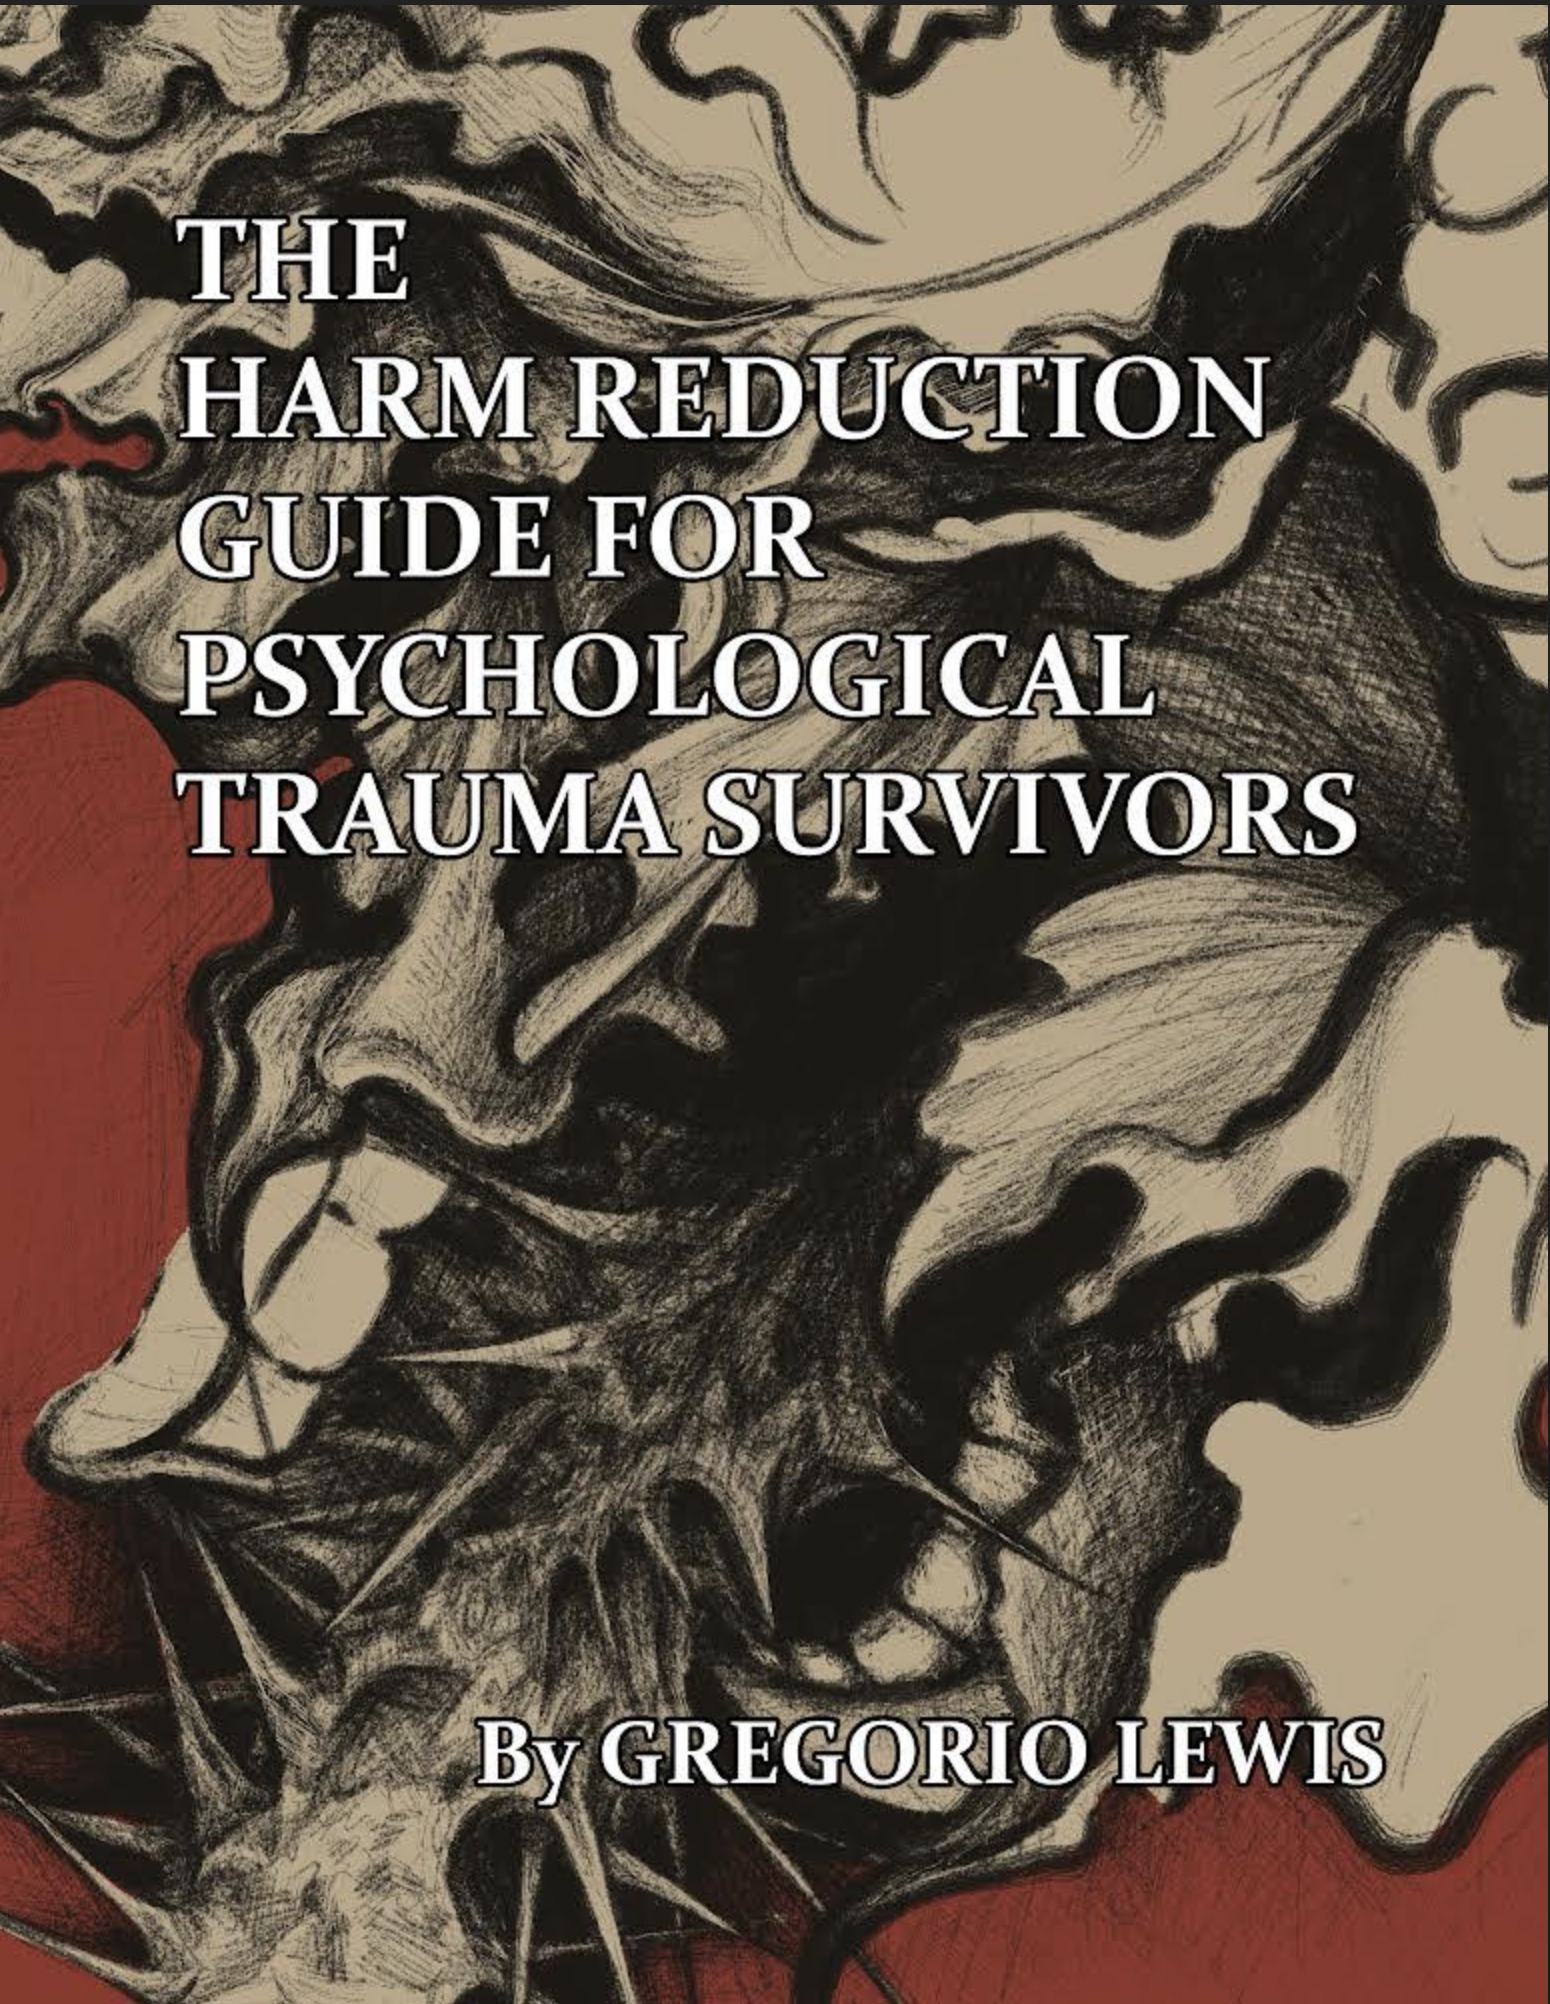 BOOK REVIEW: The Harm Reduction Guide for Psychological Trauma Survivors by Gregorio Lewis